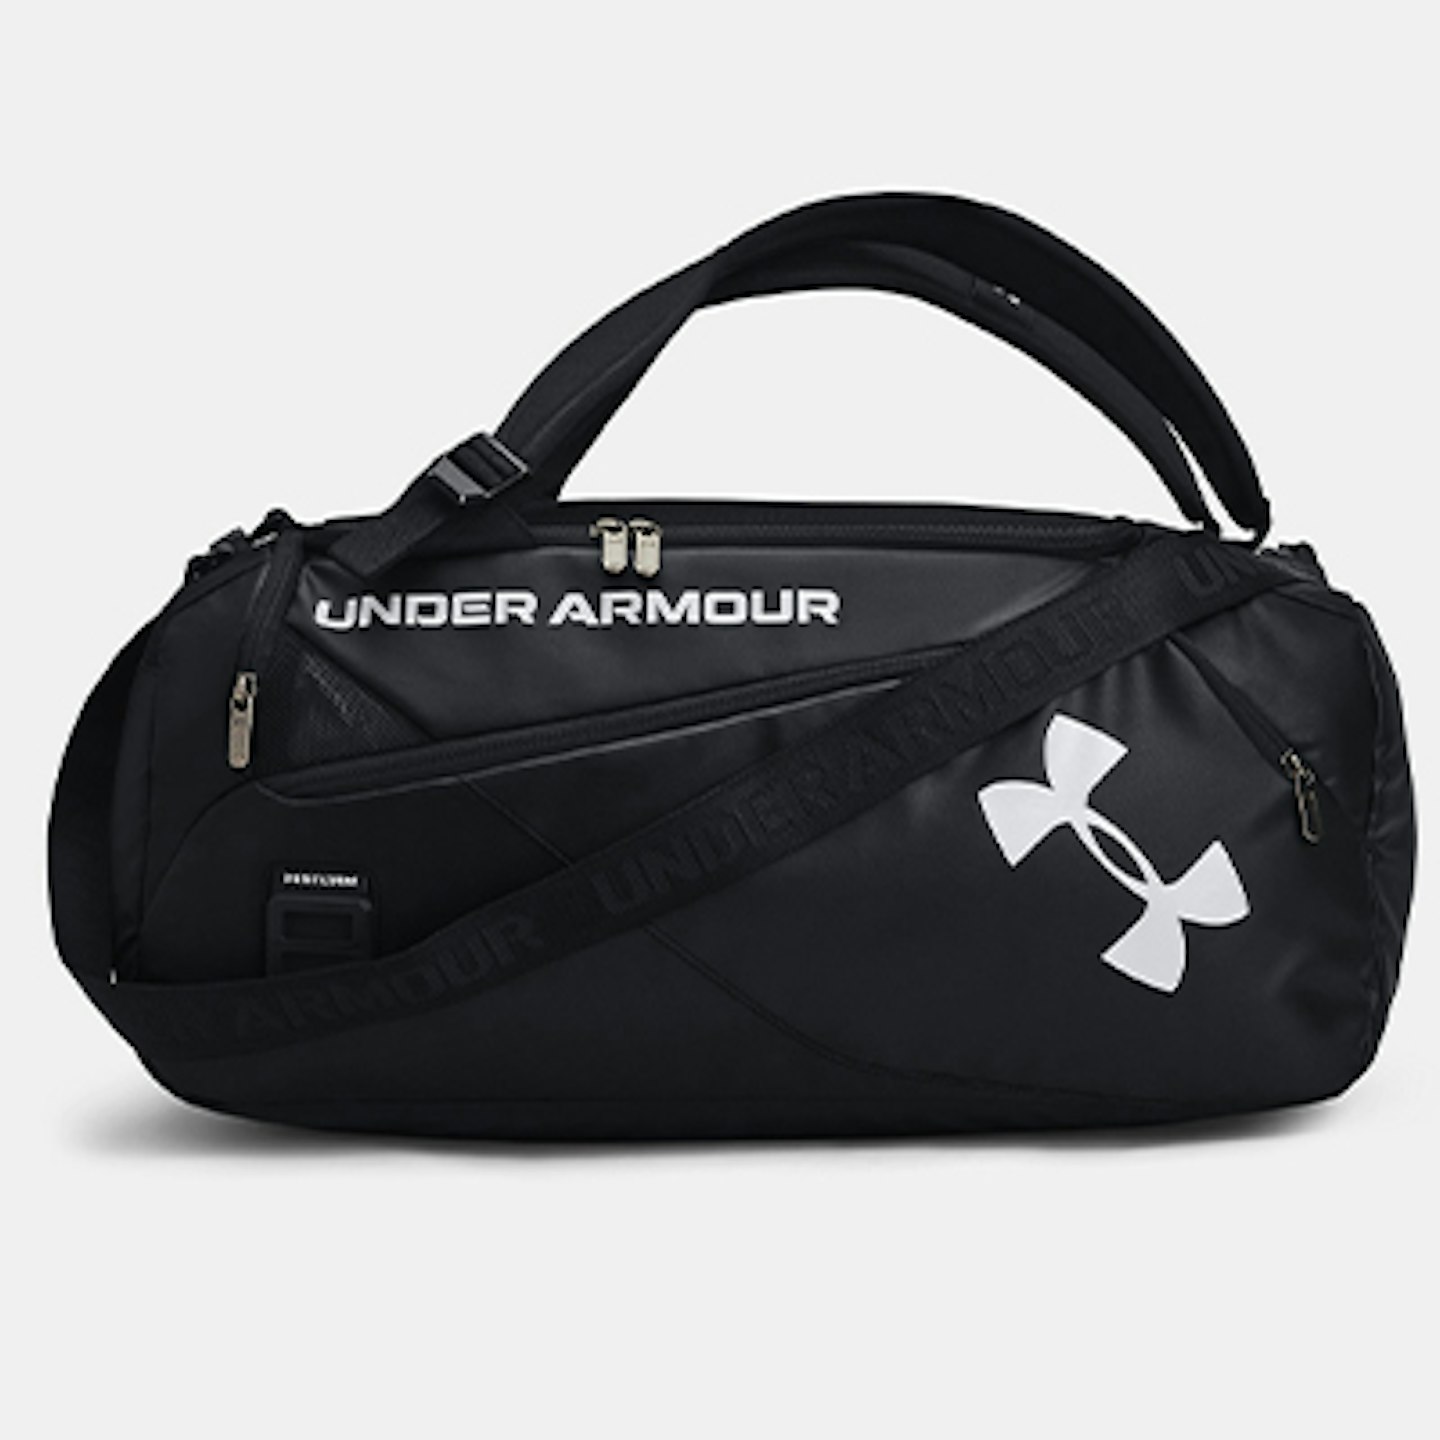 Under Armour backpack duffle bag